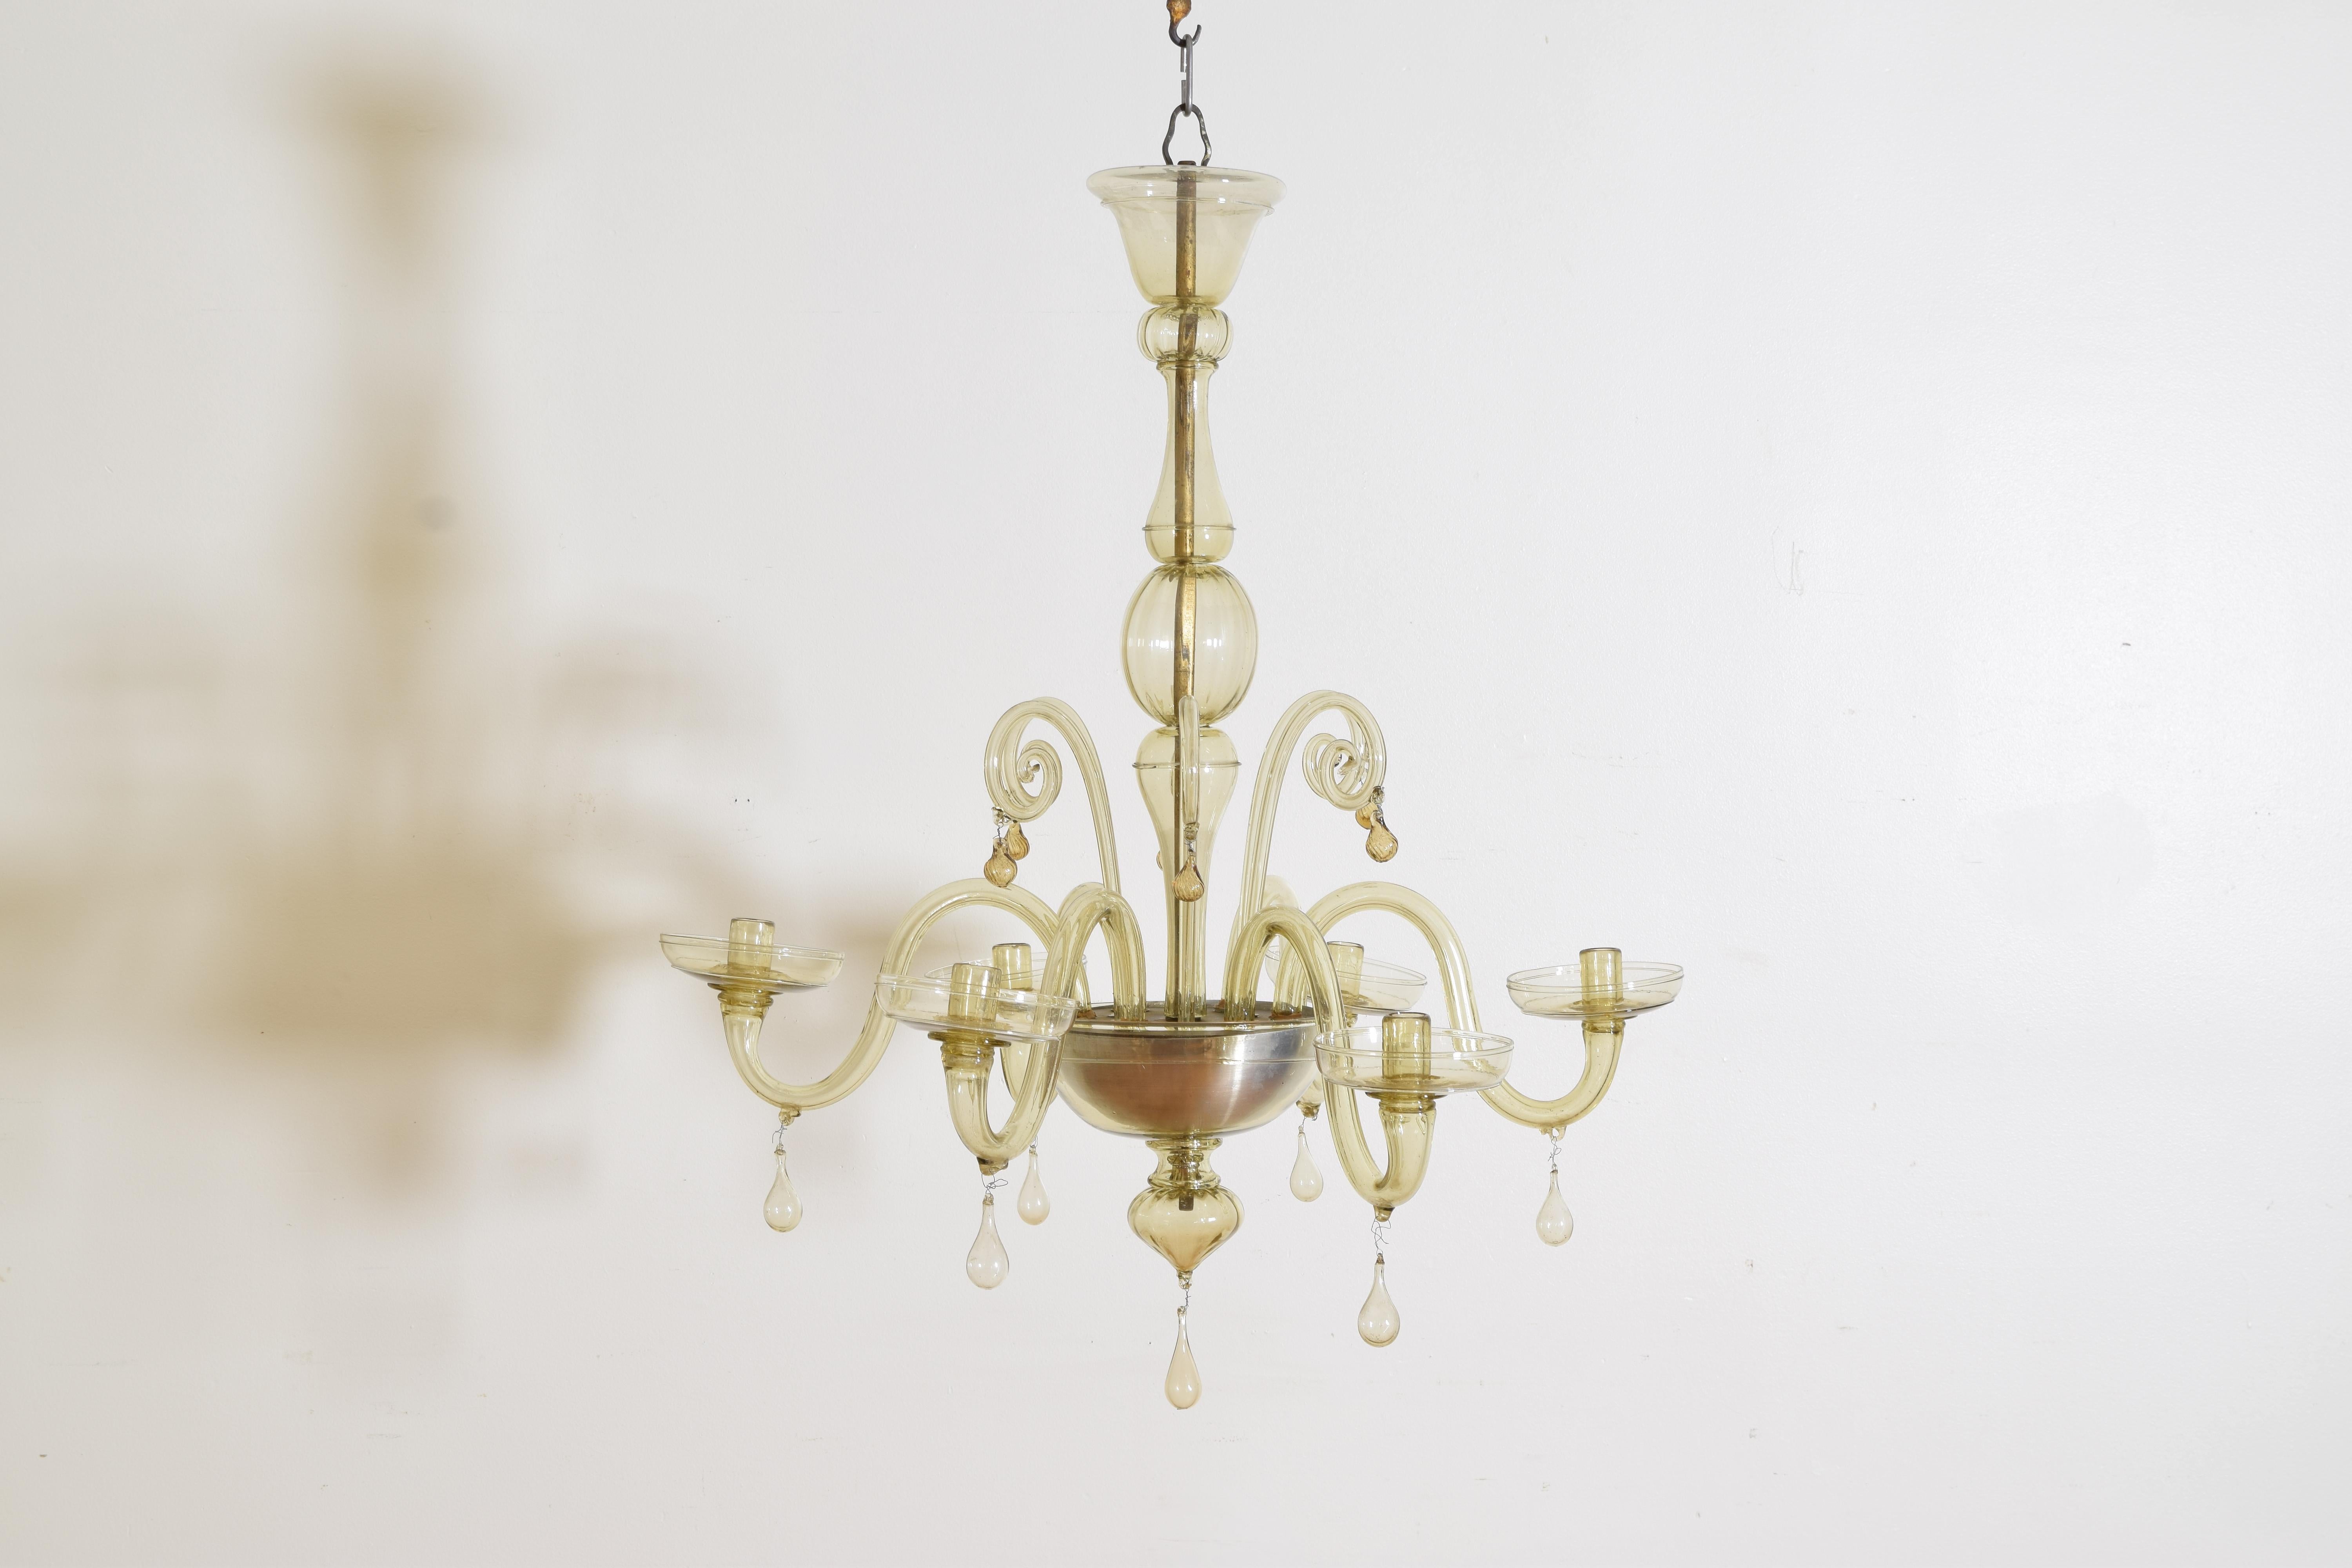 Having a 5-piece standard atop a base issuing 6 scrolls with tassels and curved arms with hanging tassels and large bobeches, the bottom of the base with a silvered metal liner, the terminal with a hanging tassel